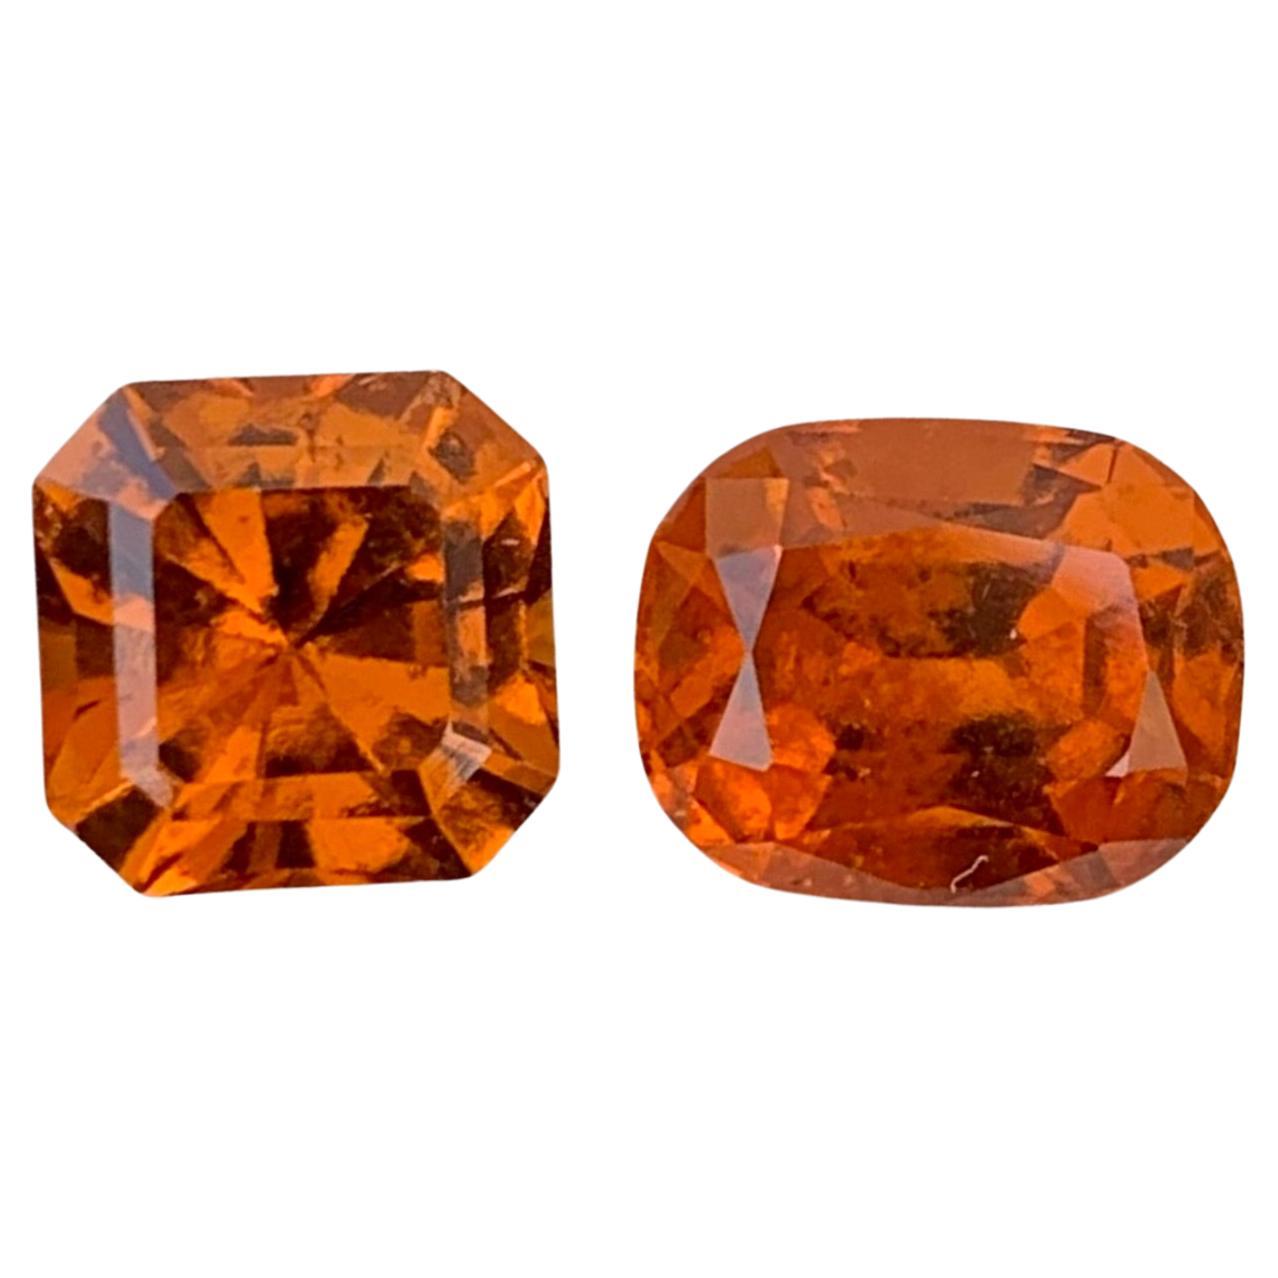 3.65 Carats Natural Loose Fanta Hessonite Garnet Pieces For Ring Jewelry